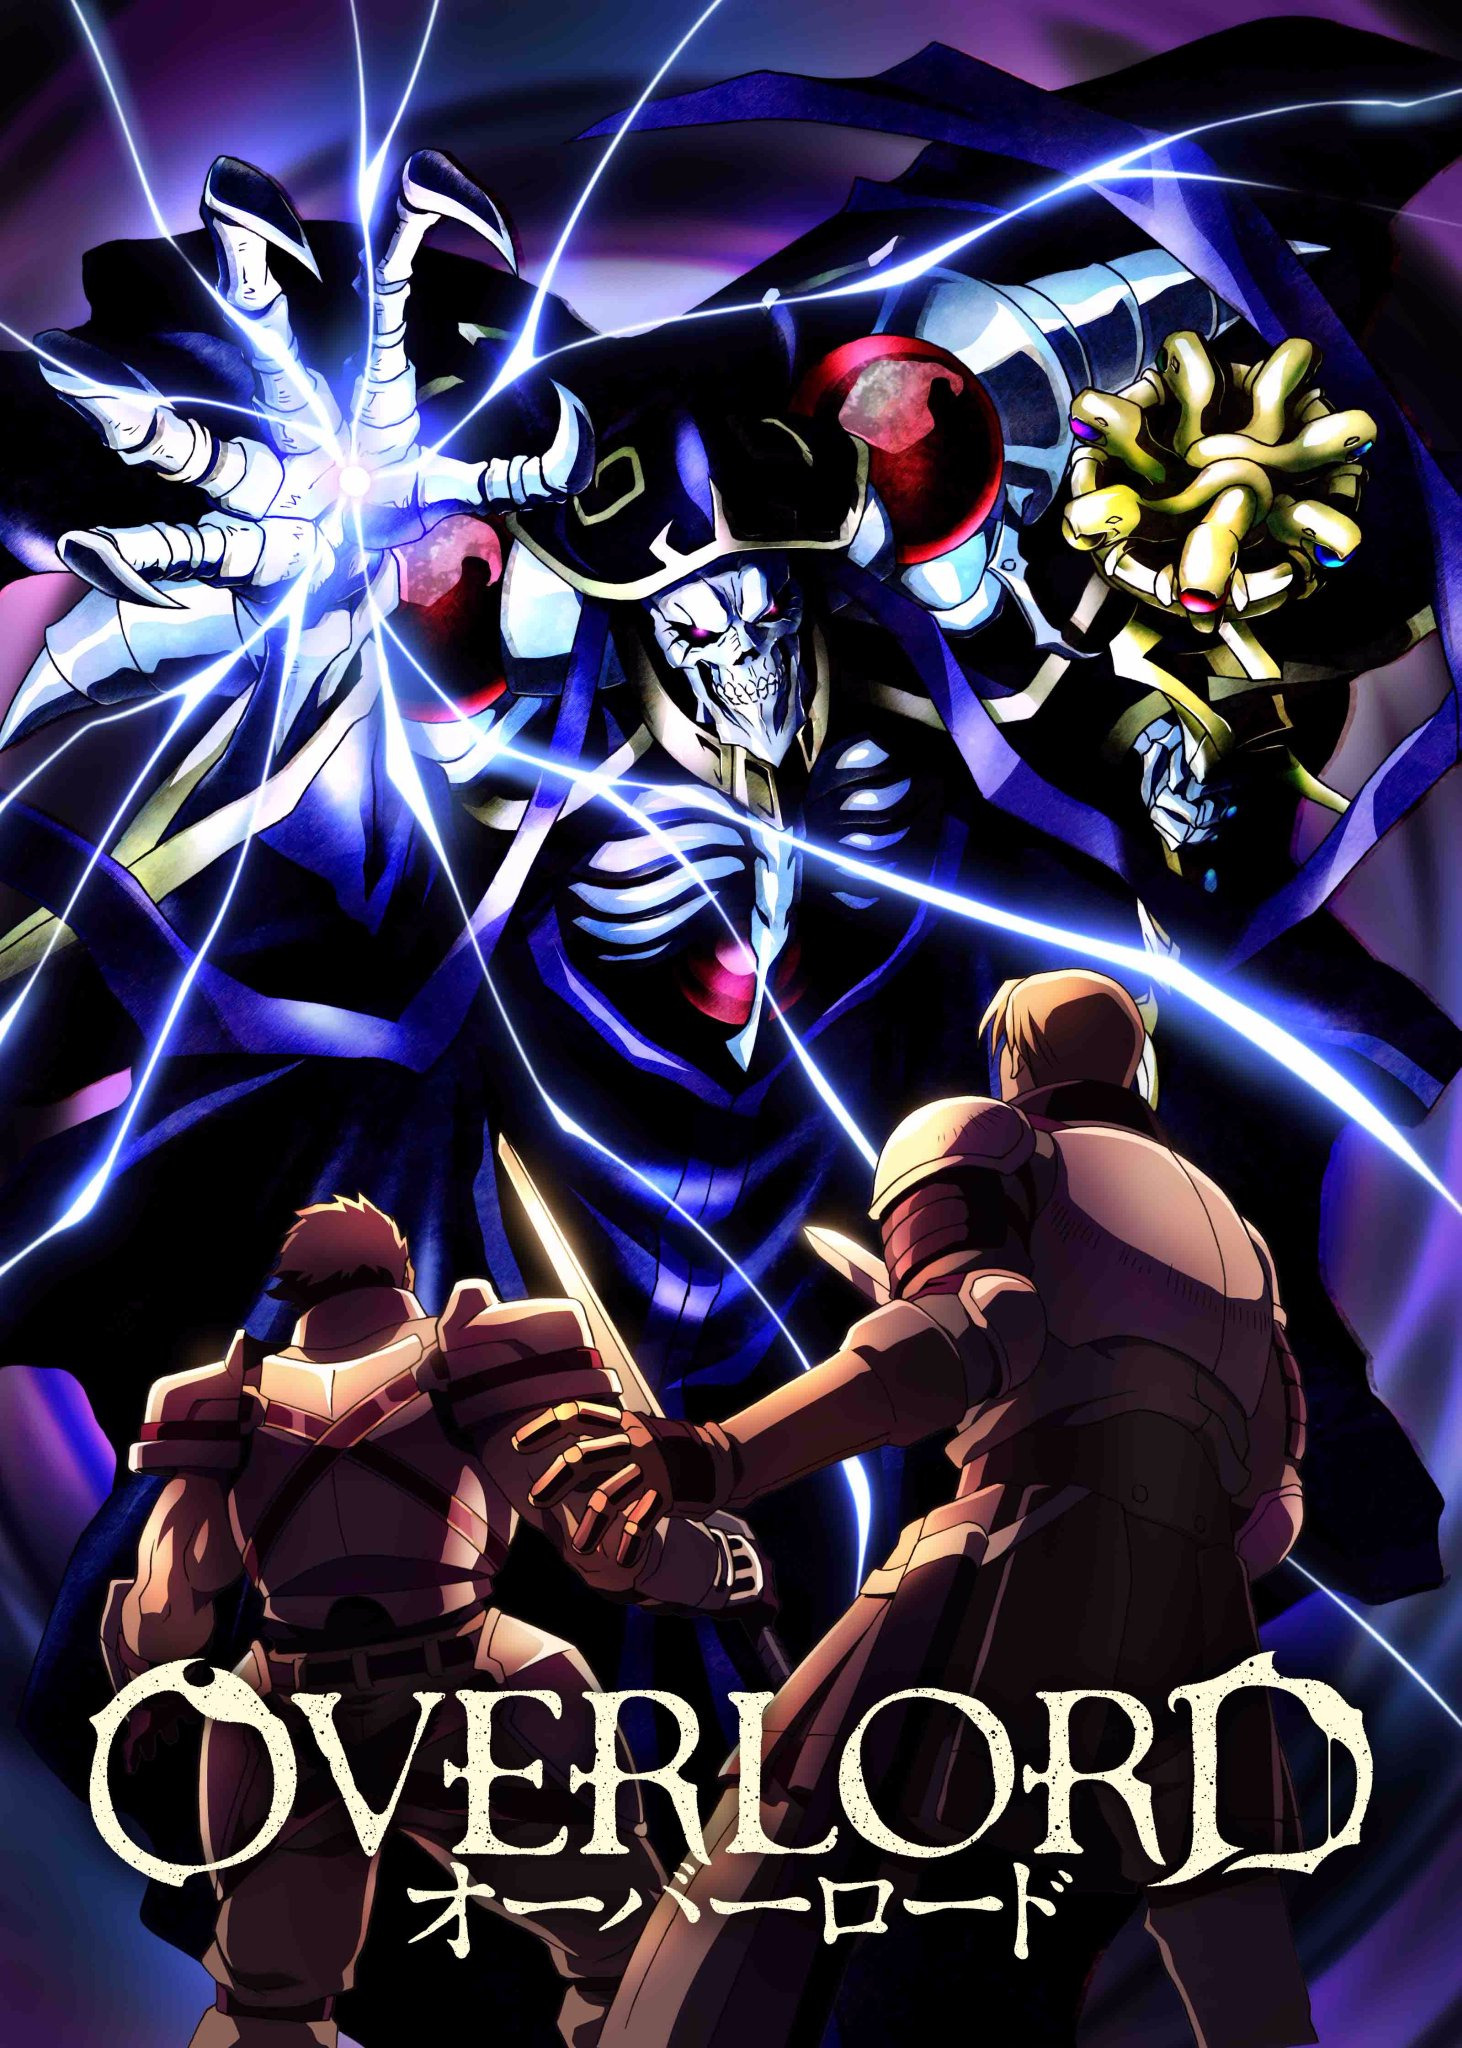 Anime DVD English Dubbed Overlord Season 3 Vol 1-13 End Gift for